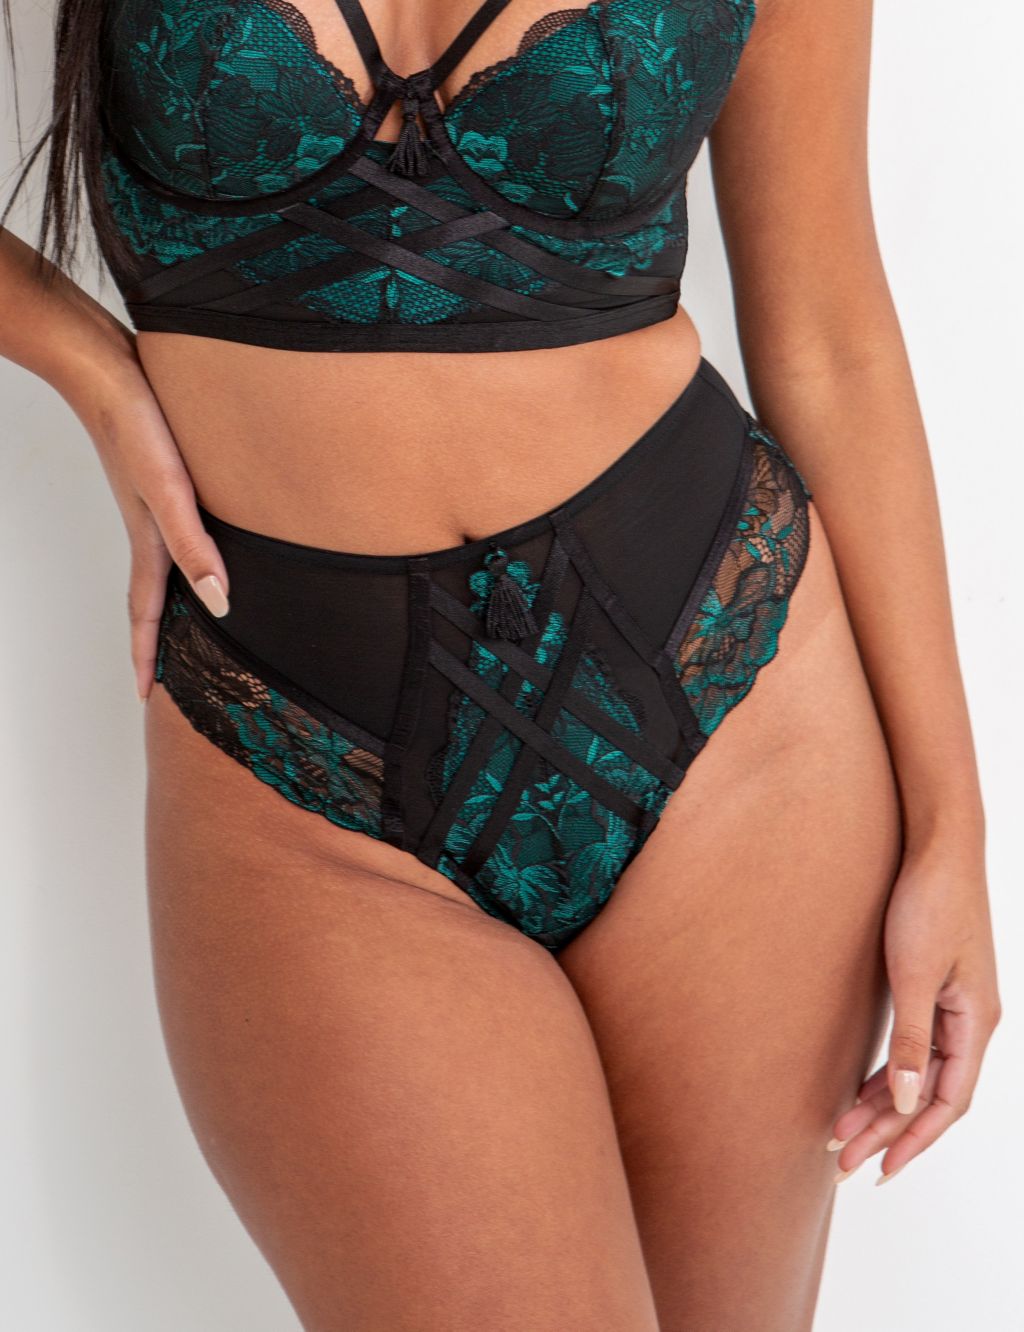 After Hours Lace High Waisted Full Briefs image 1